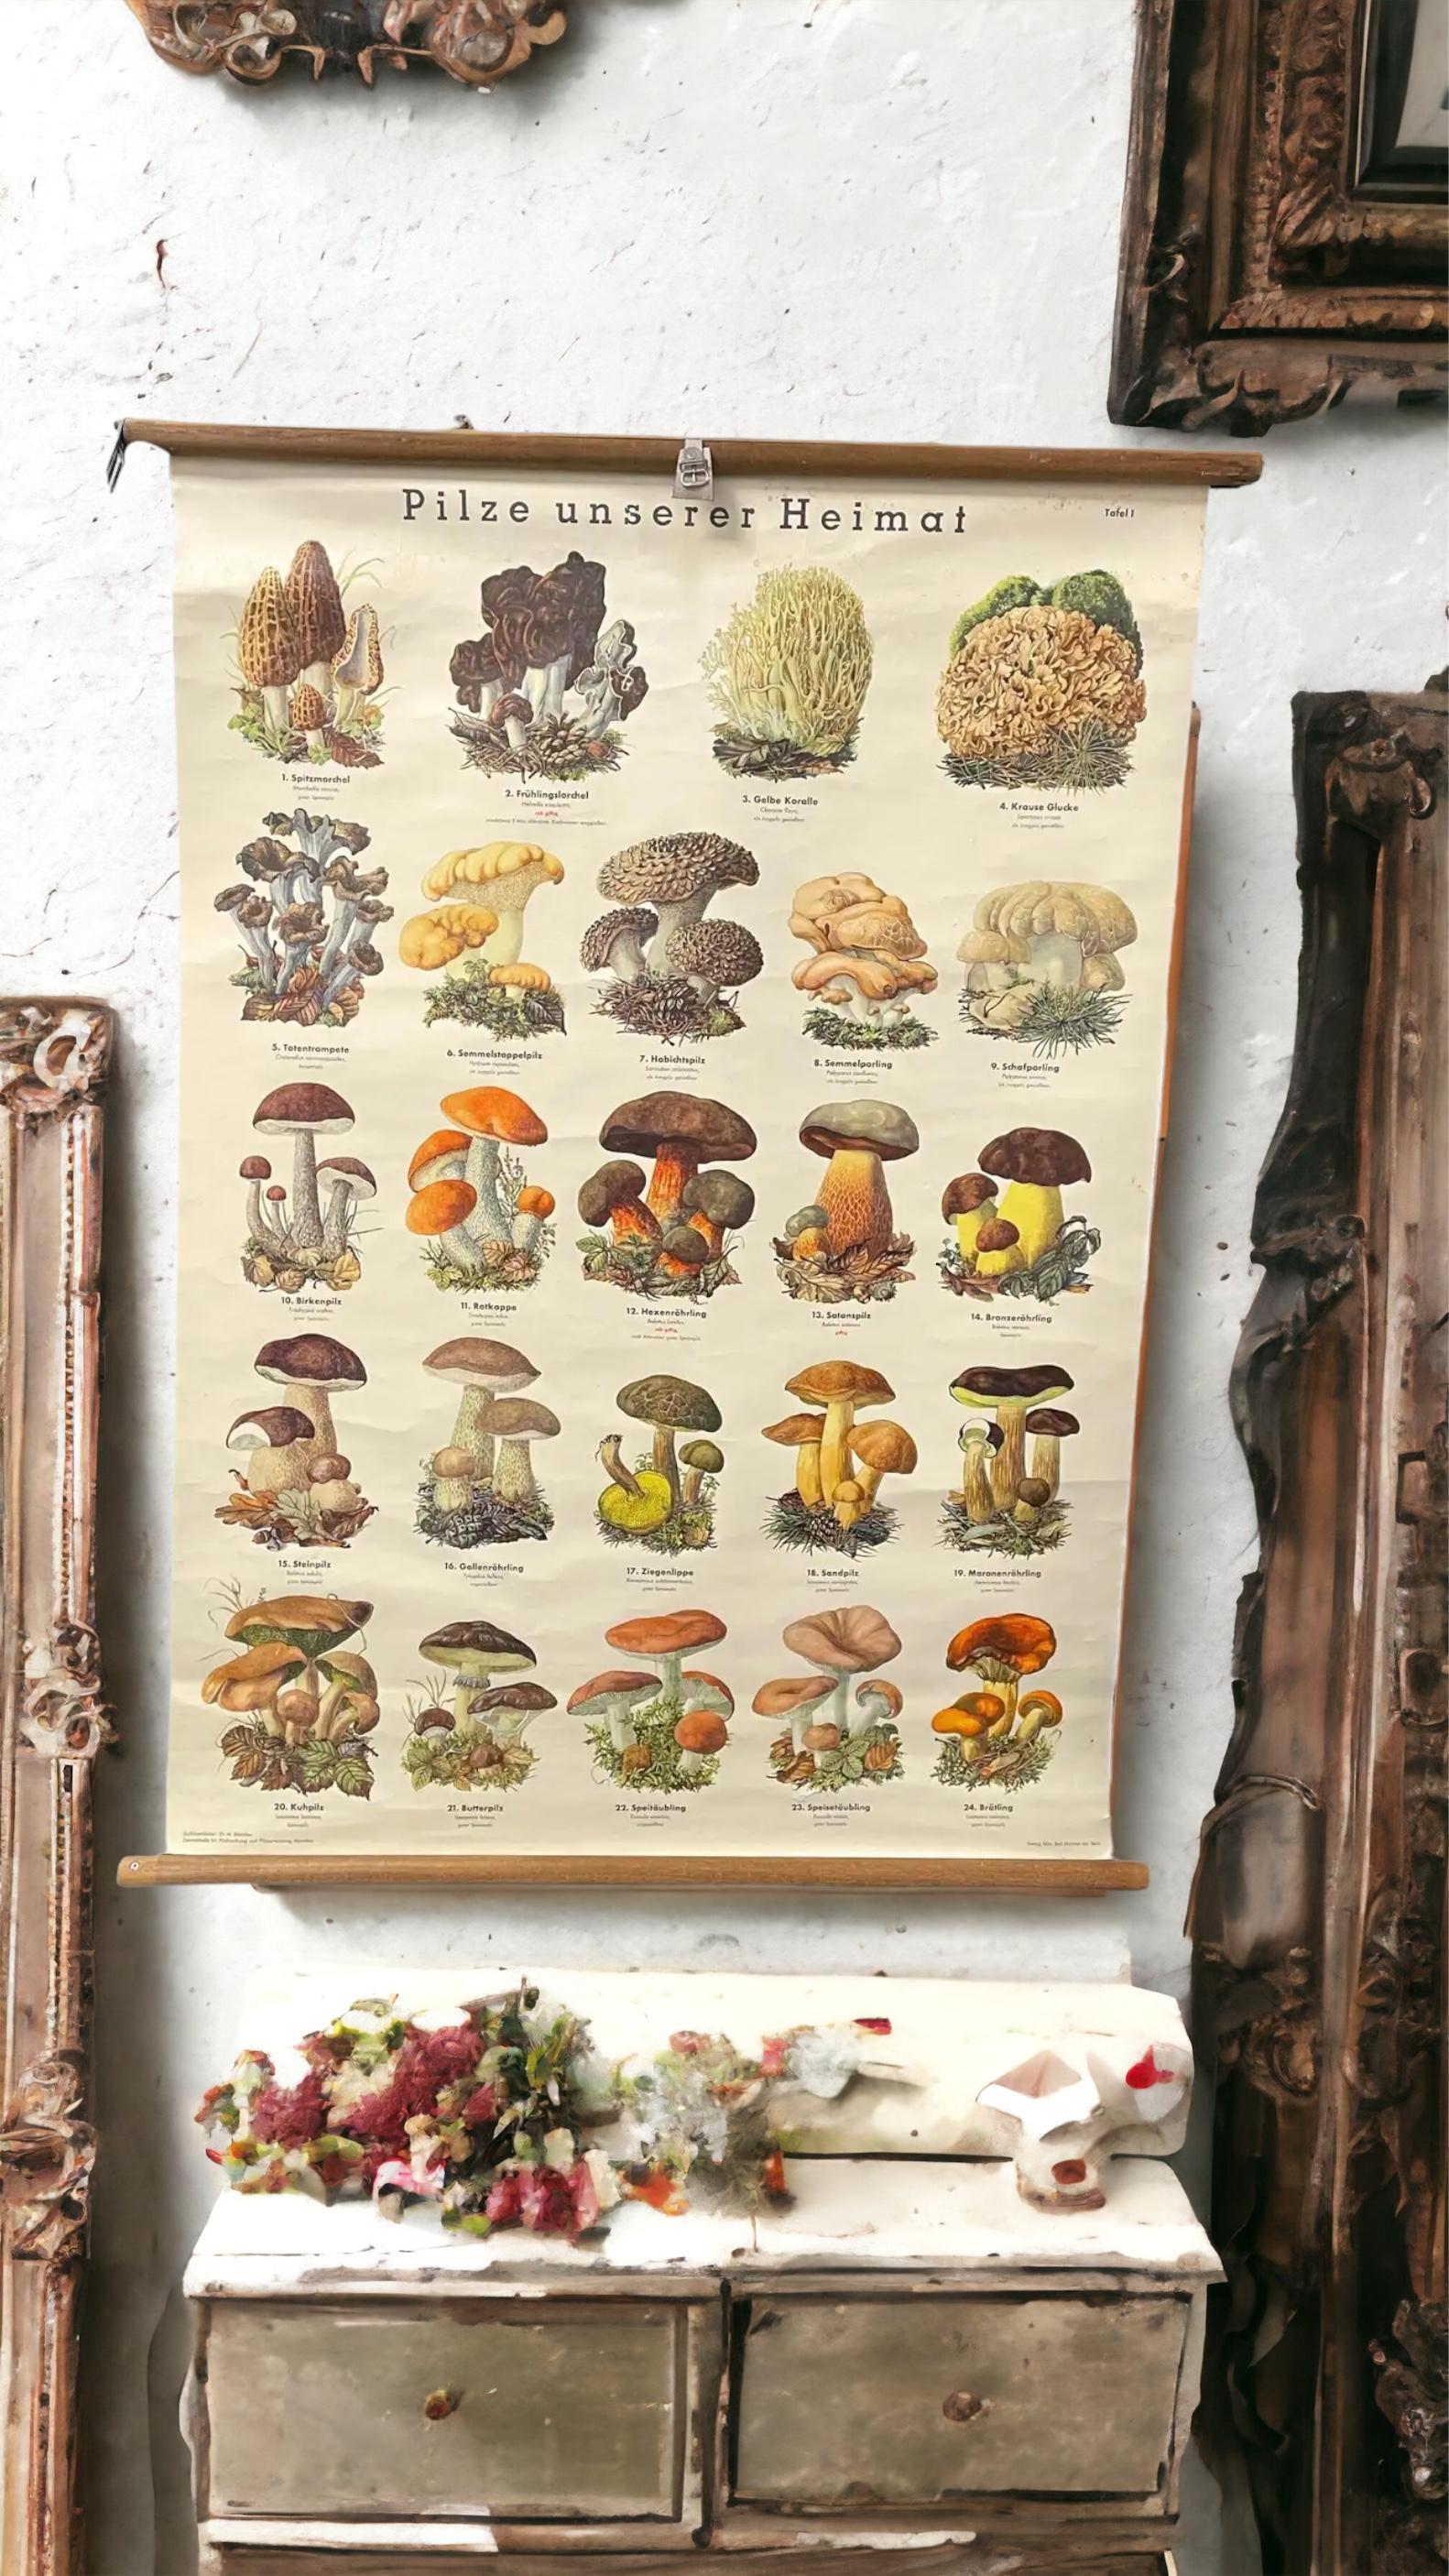 This rare vintage wall chart shows different types of mushrooms, which are native to middle europe. This kind of wall charts are used as teaching material in German schools. Colorful print on paper reinforced with canvas. 
This type of learning